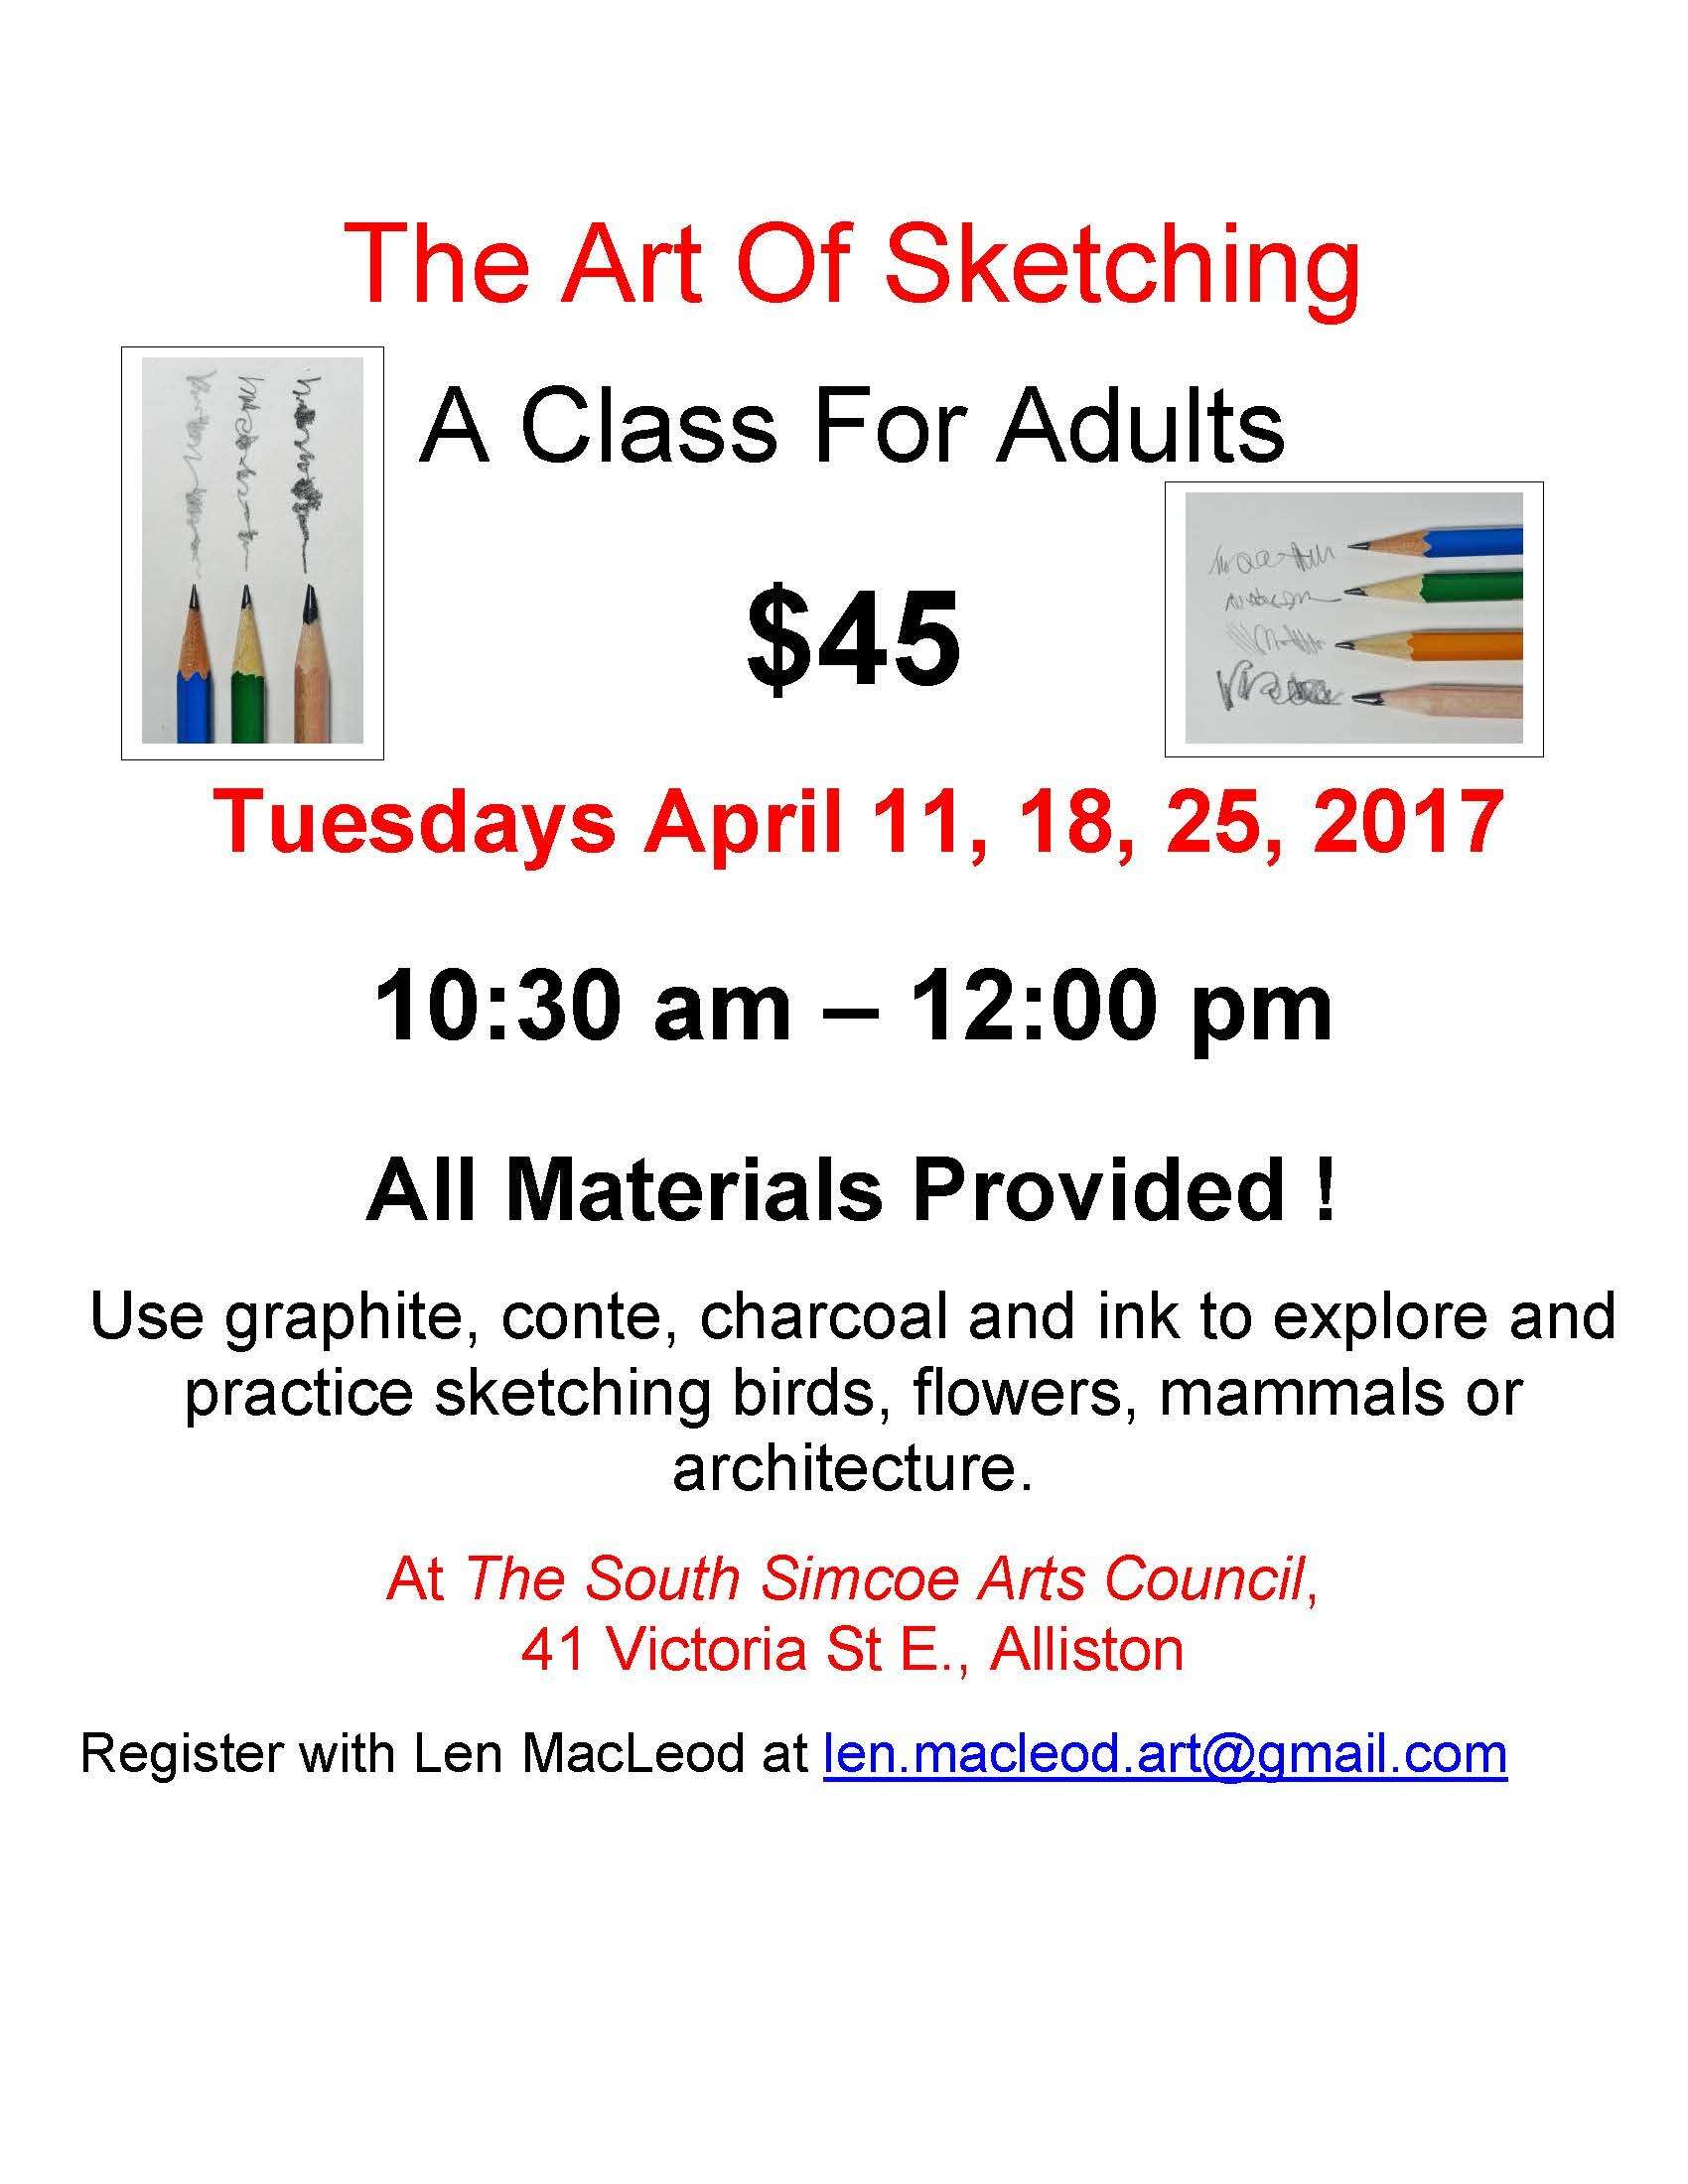 THE ART OF SKETCHING - A Class for Adults